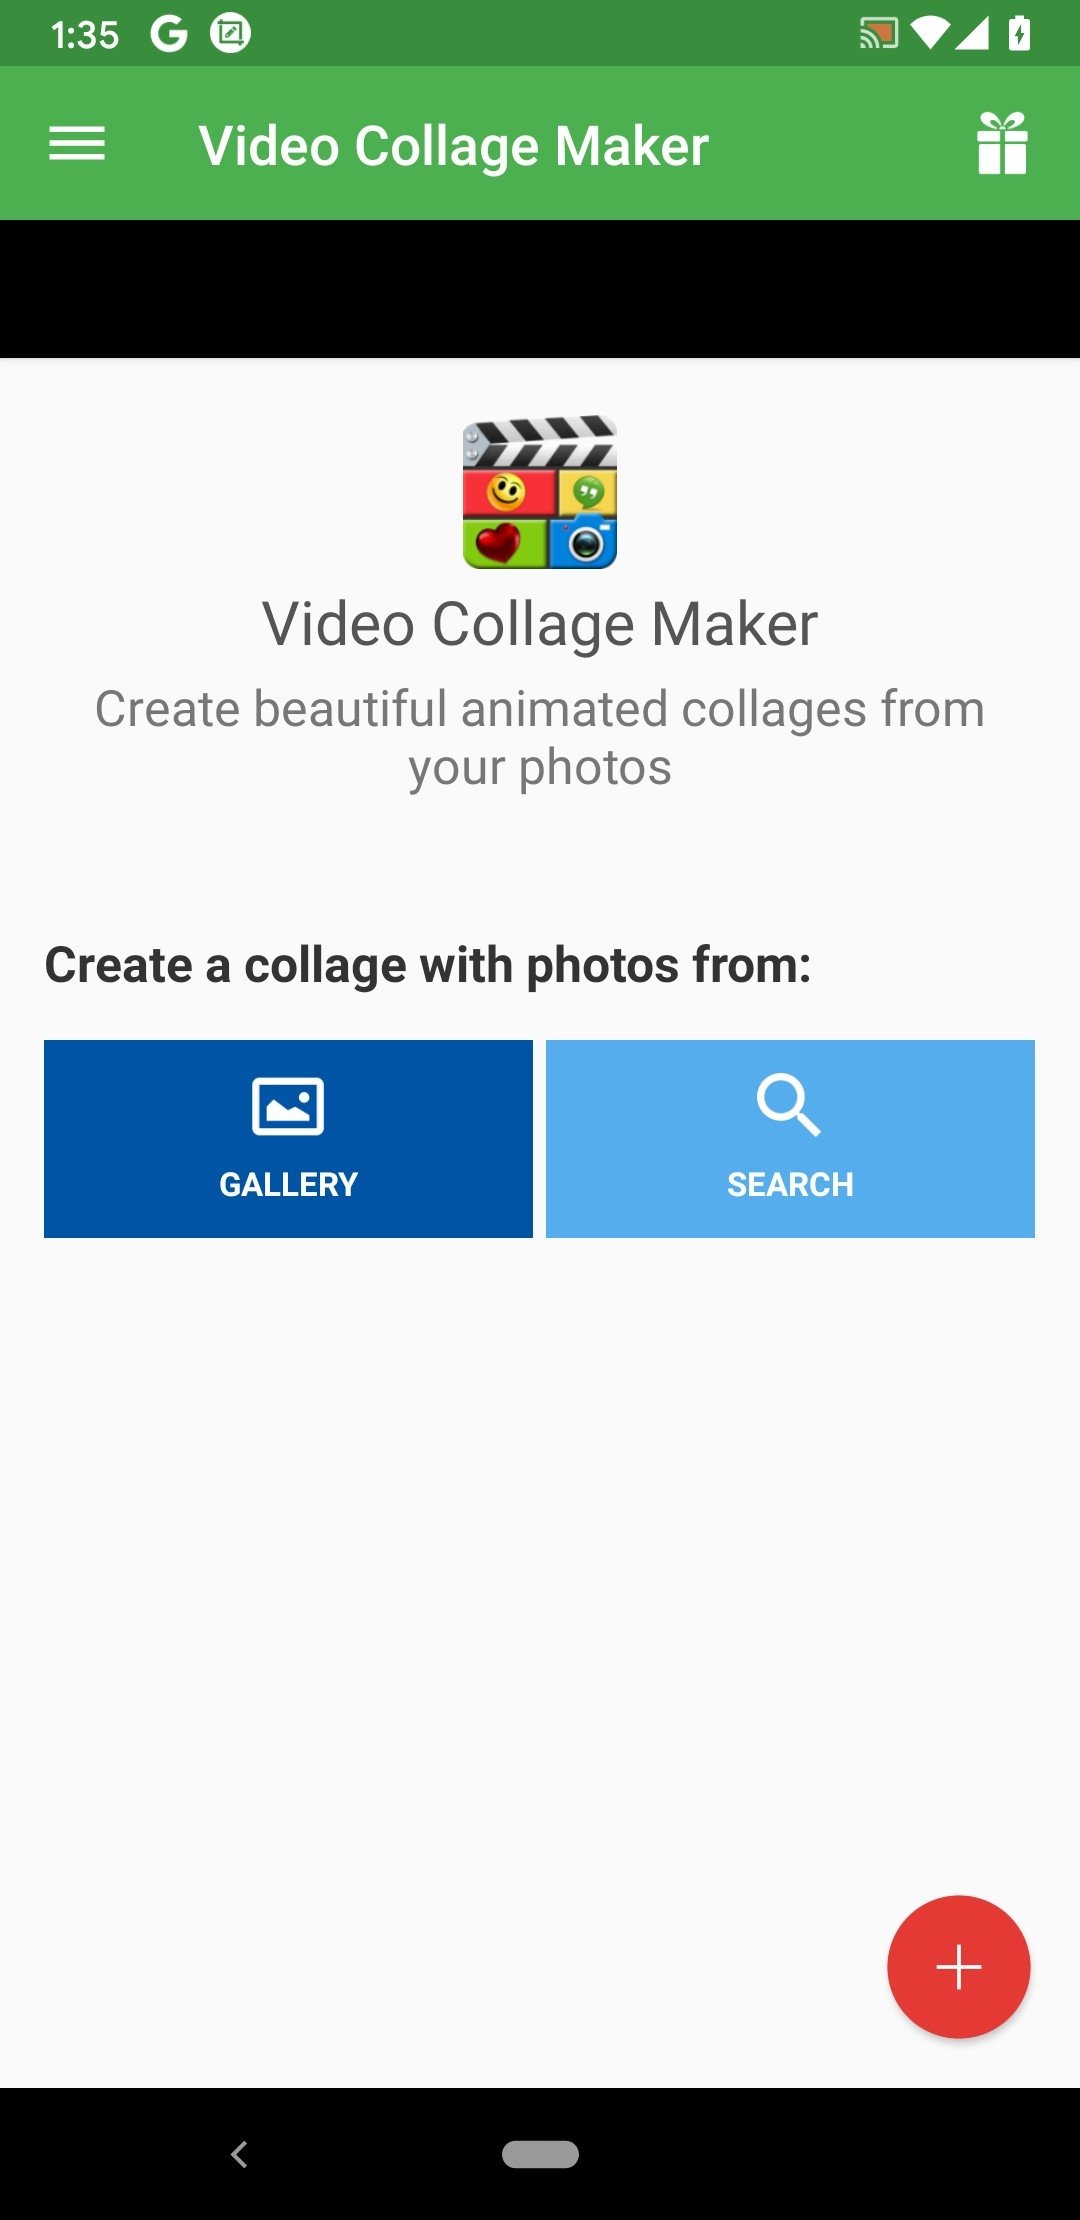 Video Collage Maker APK download - Video Collage Maker for Android Free